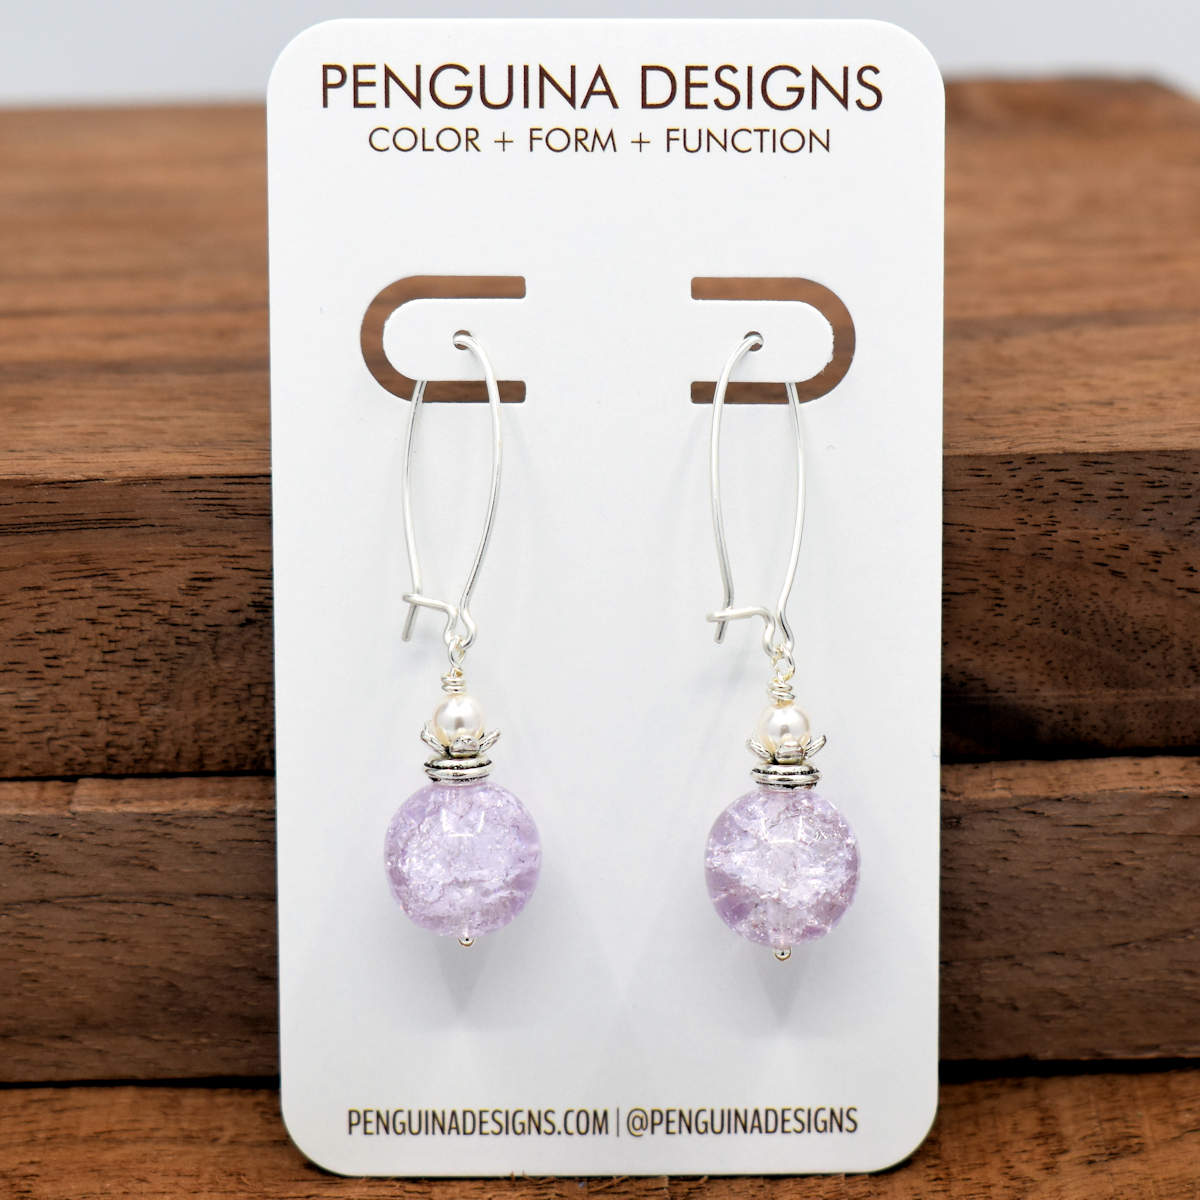 A pair of earrings on a white card rest against a wood background. The earrings have long silver oval wires that latch and pale lilac crackle glass rounds with a flower cup on top holding a white pearl bead. 